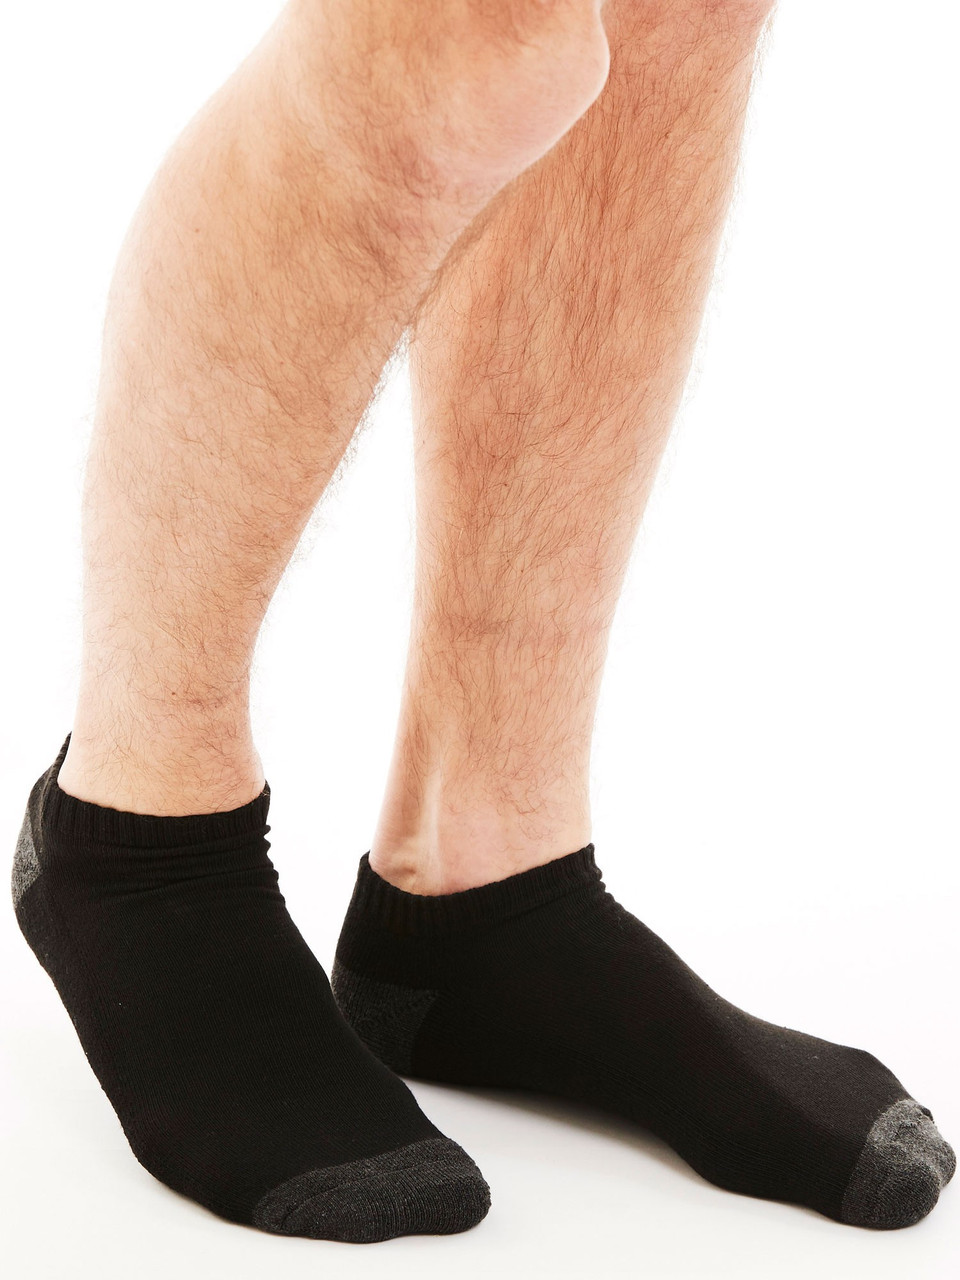 Men's Low Cut Socks - 18 Pack - Synthetic - Bolter